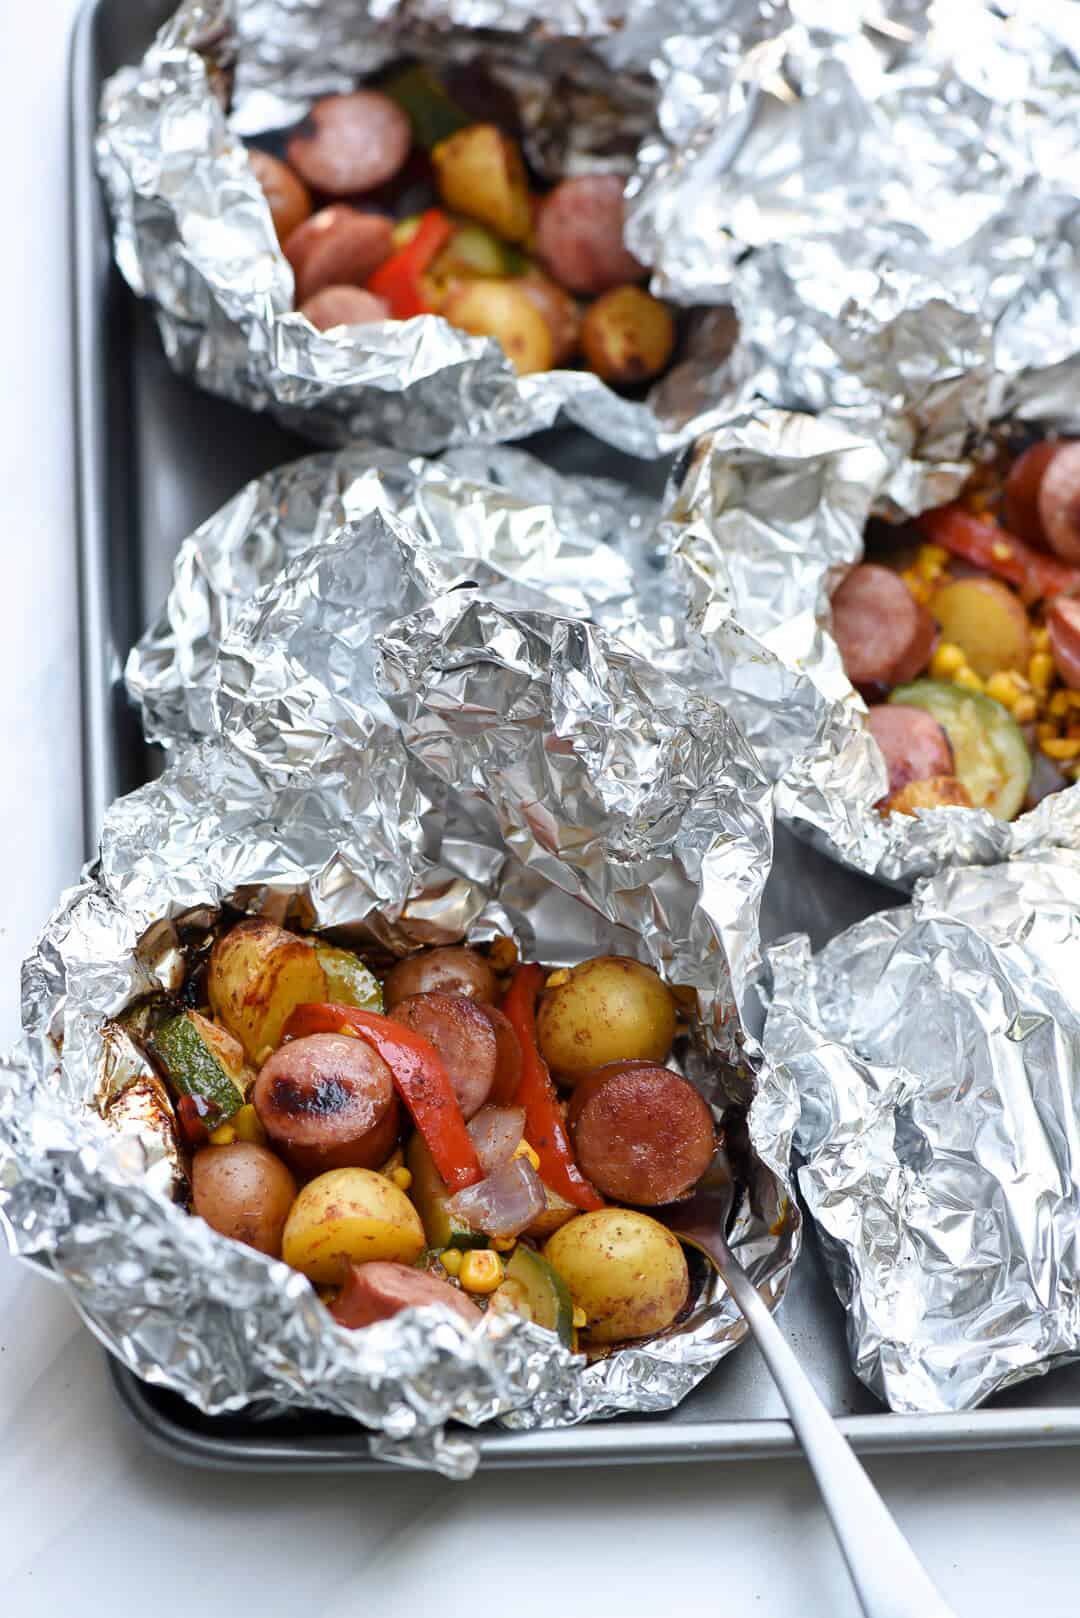 10 Healthy Foil Pack Meals For When You Don't Want To Do Dishes